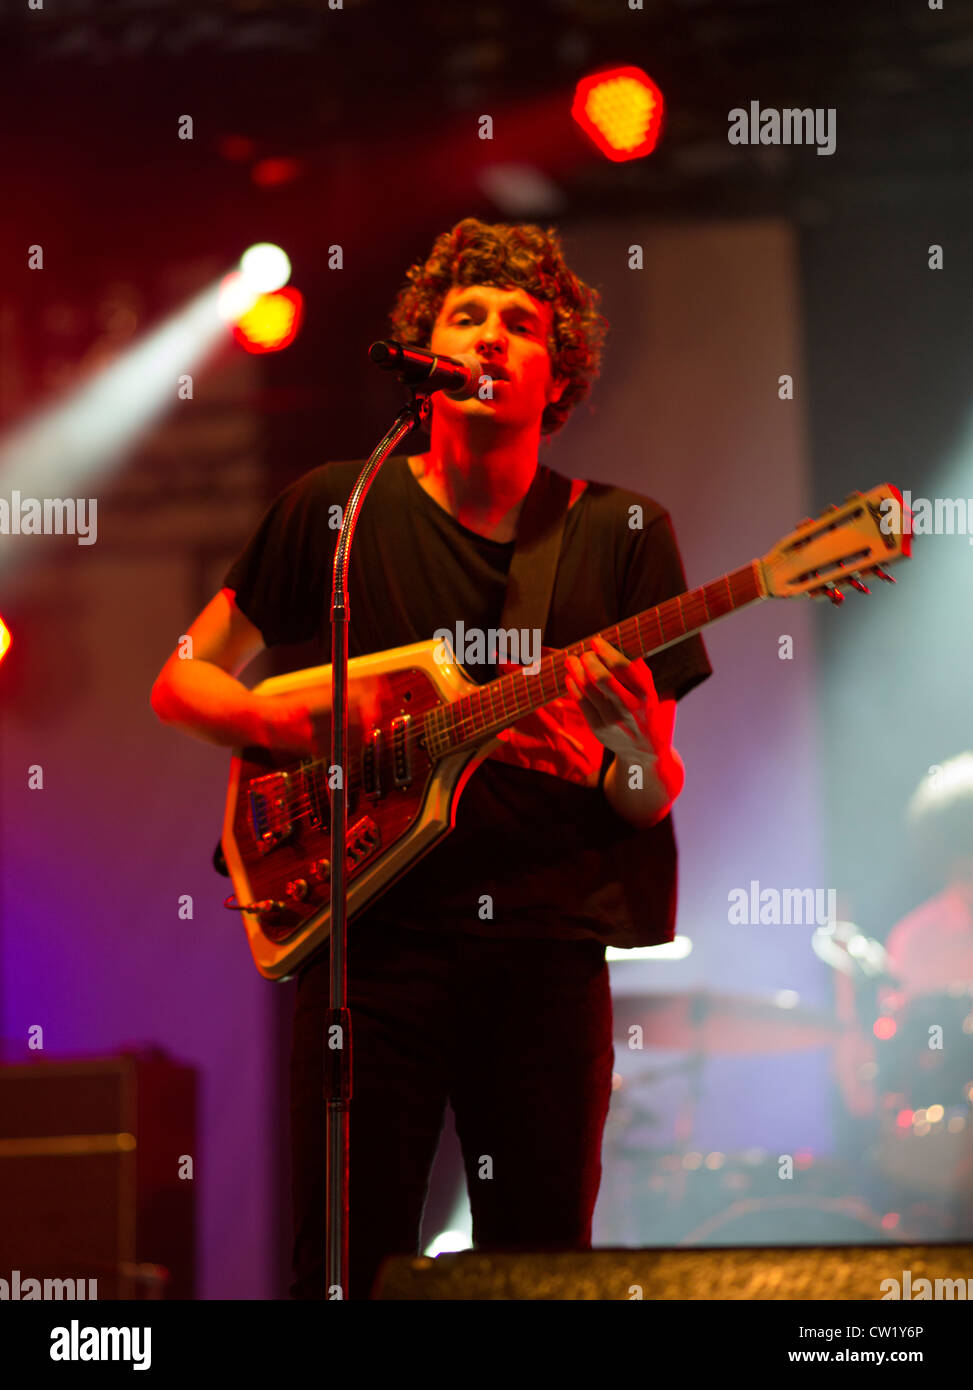 Luke Pritchard  lead singer of The Kooks  a British Indie rock band formed in Brighton, East Sussex, UK Stock Photo